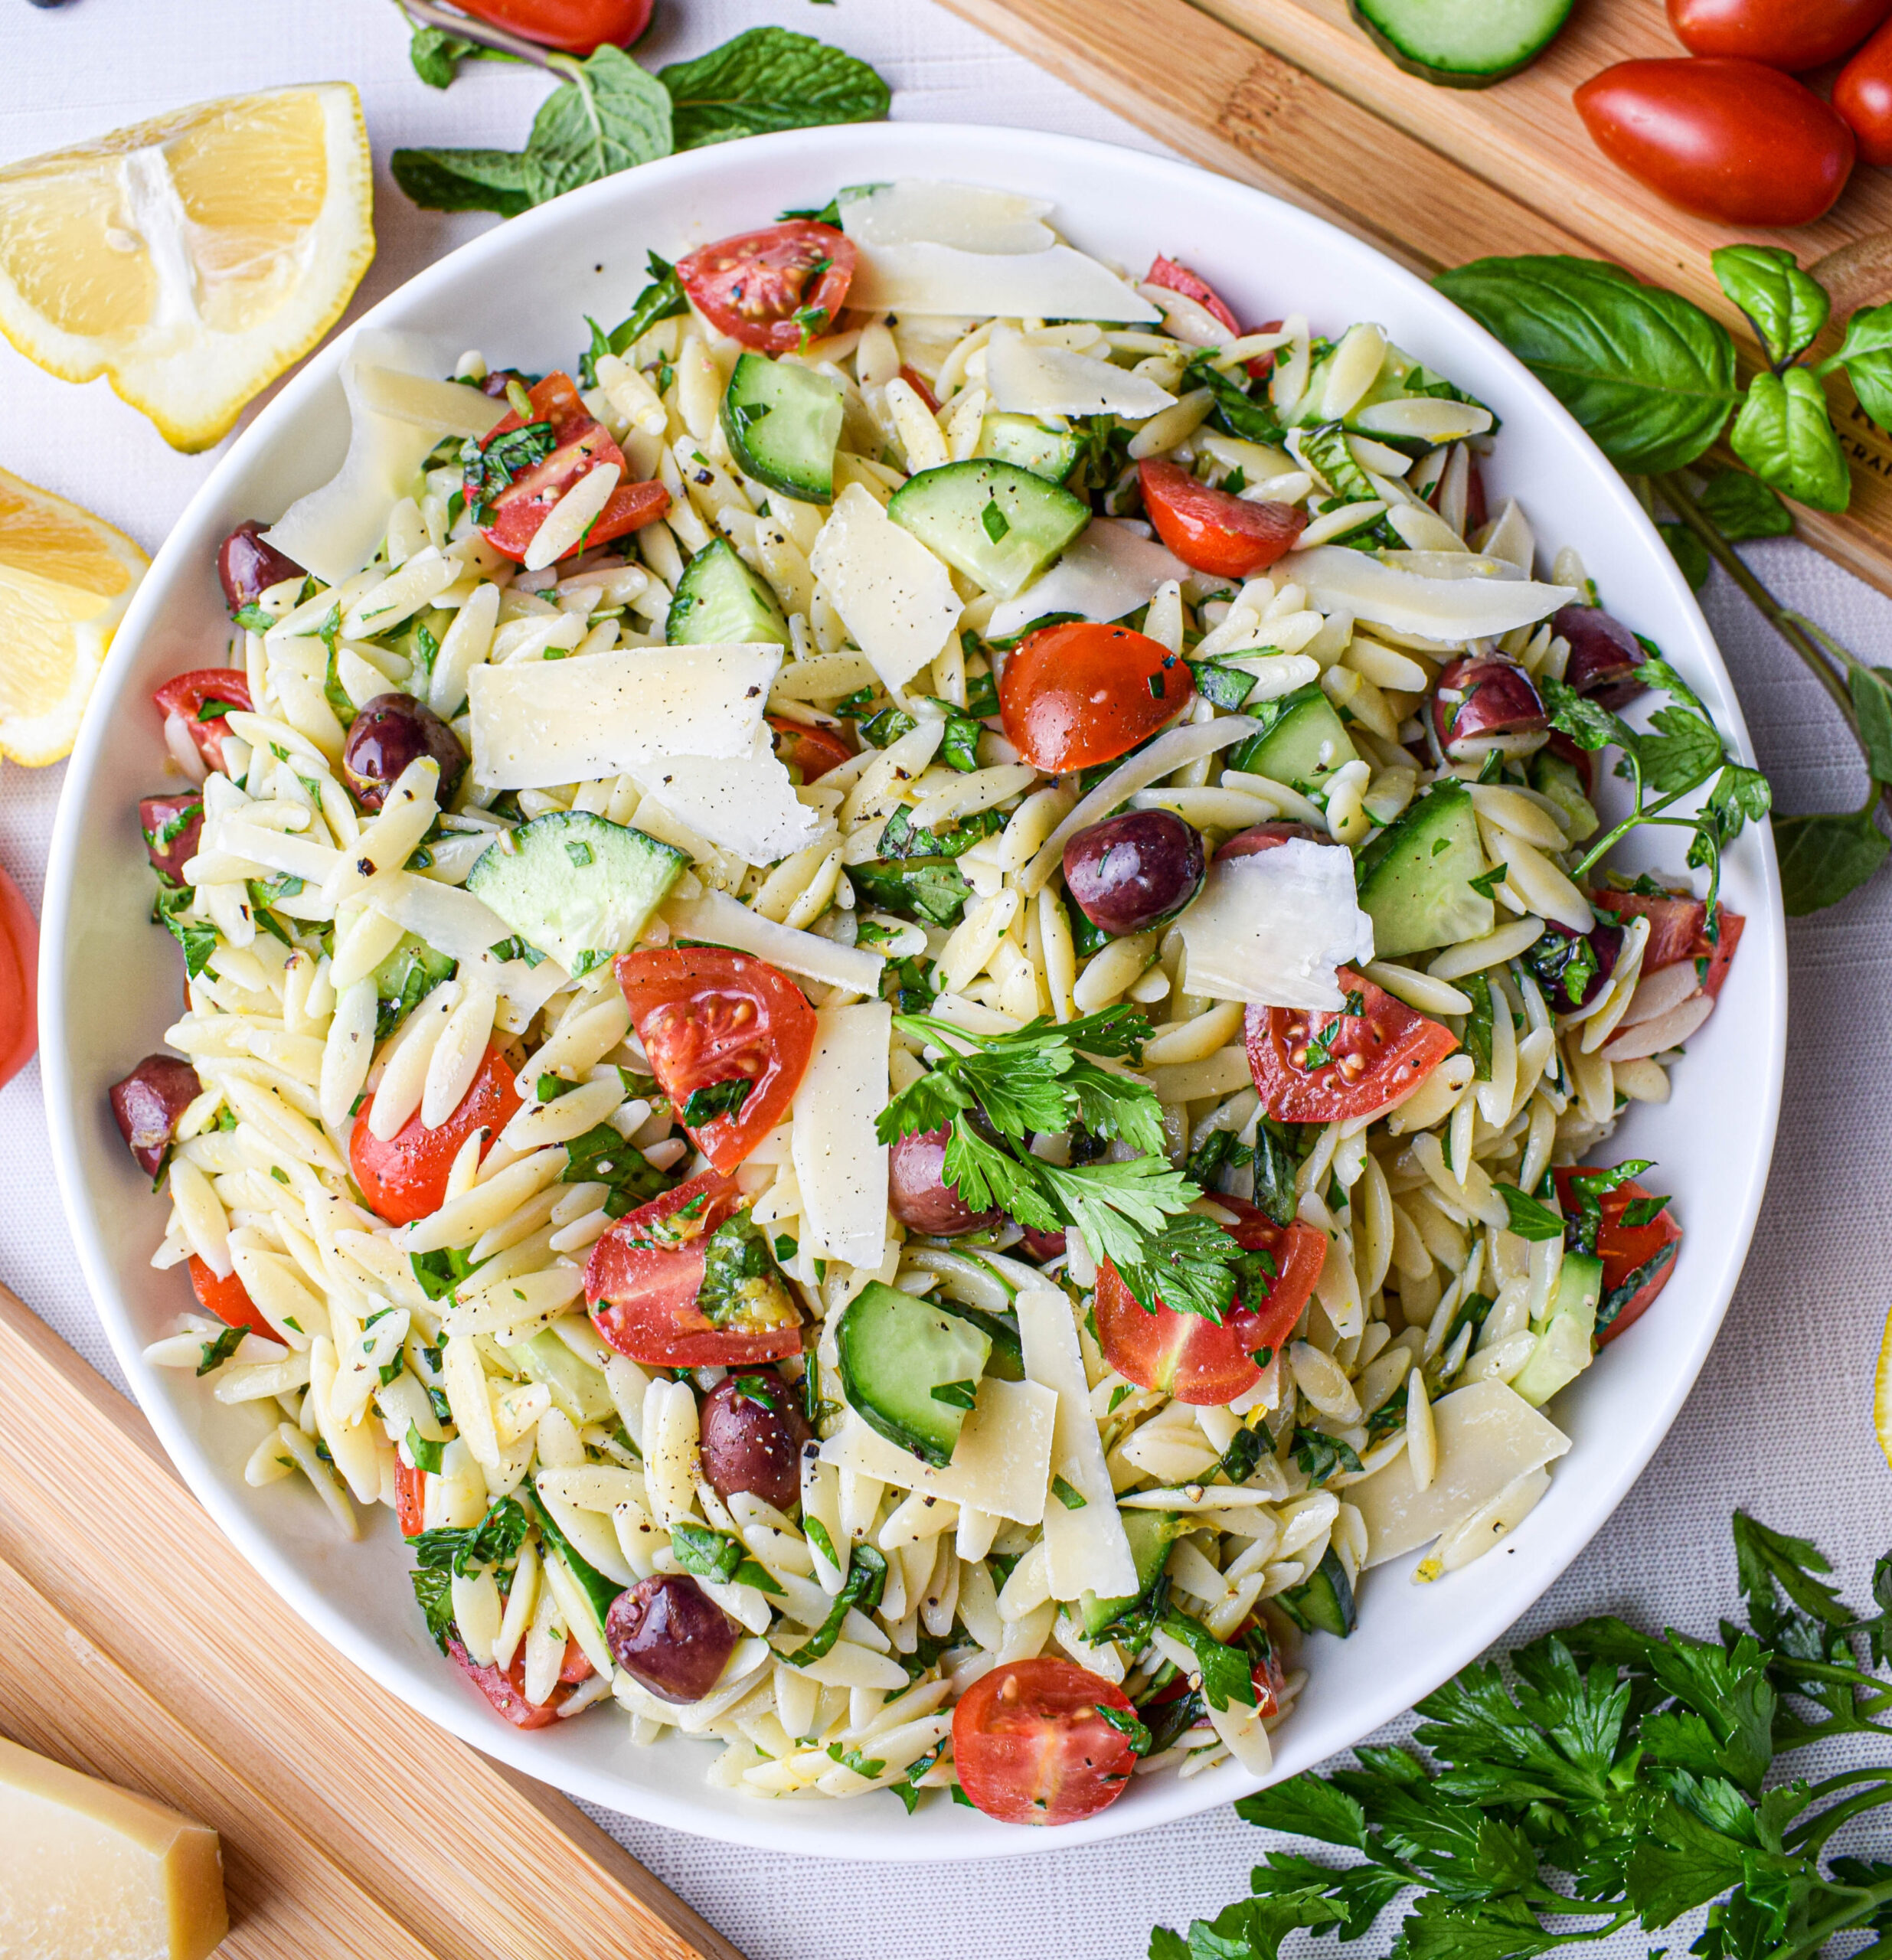 bowl filled with lemon orzo pasta salad with cucumbers, tomatoes, olives, parmesan cheese and fresh herbs